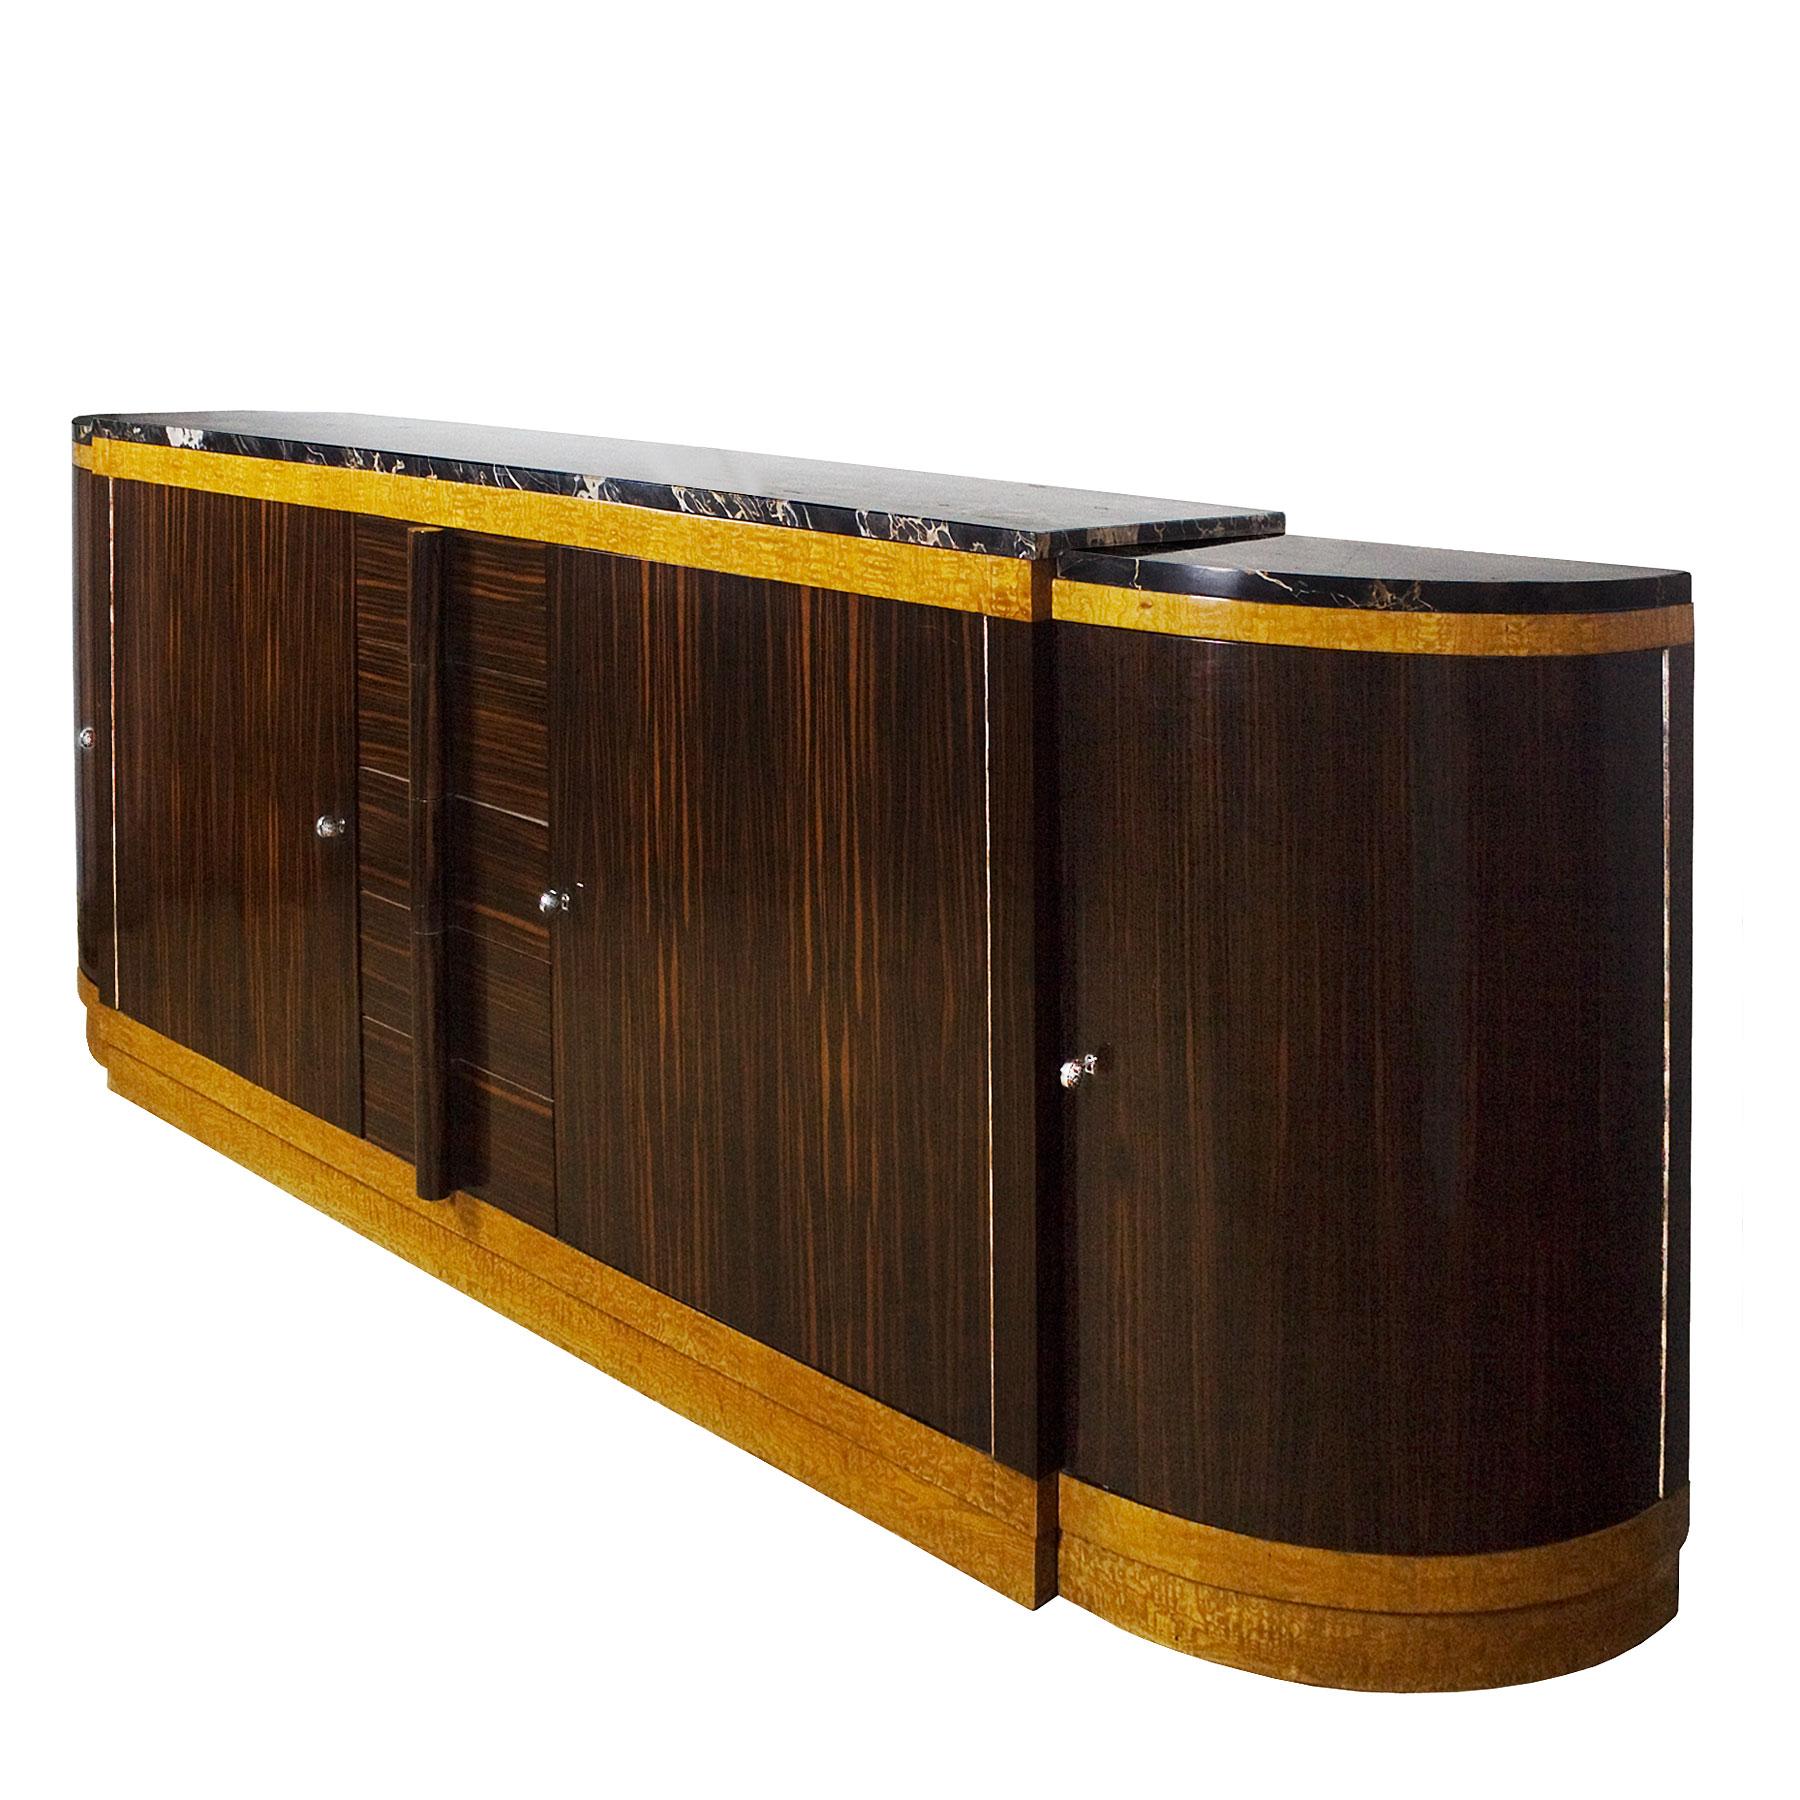 Spectacular large rounded Art Deco sideboard, oak structure with Macassar ebony and mottled maple veneer, French polish. Five drawers with solid Macassar ebony handles. Solid oak interiors and thick Portor marble on top in three pieces. Exceptional